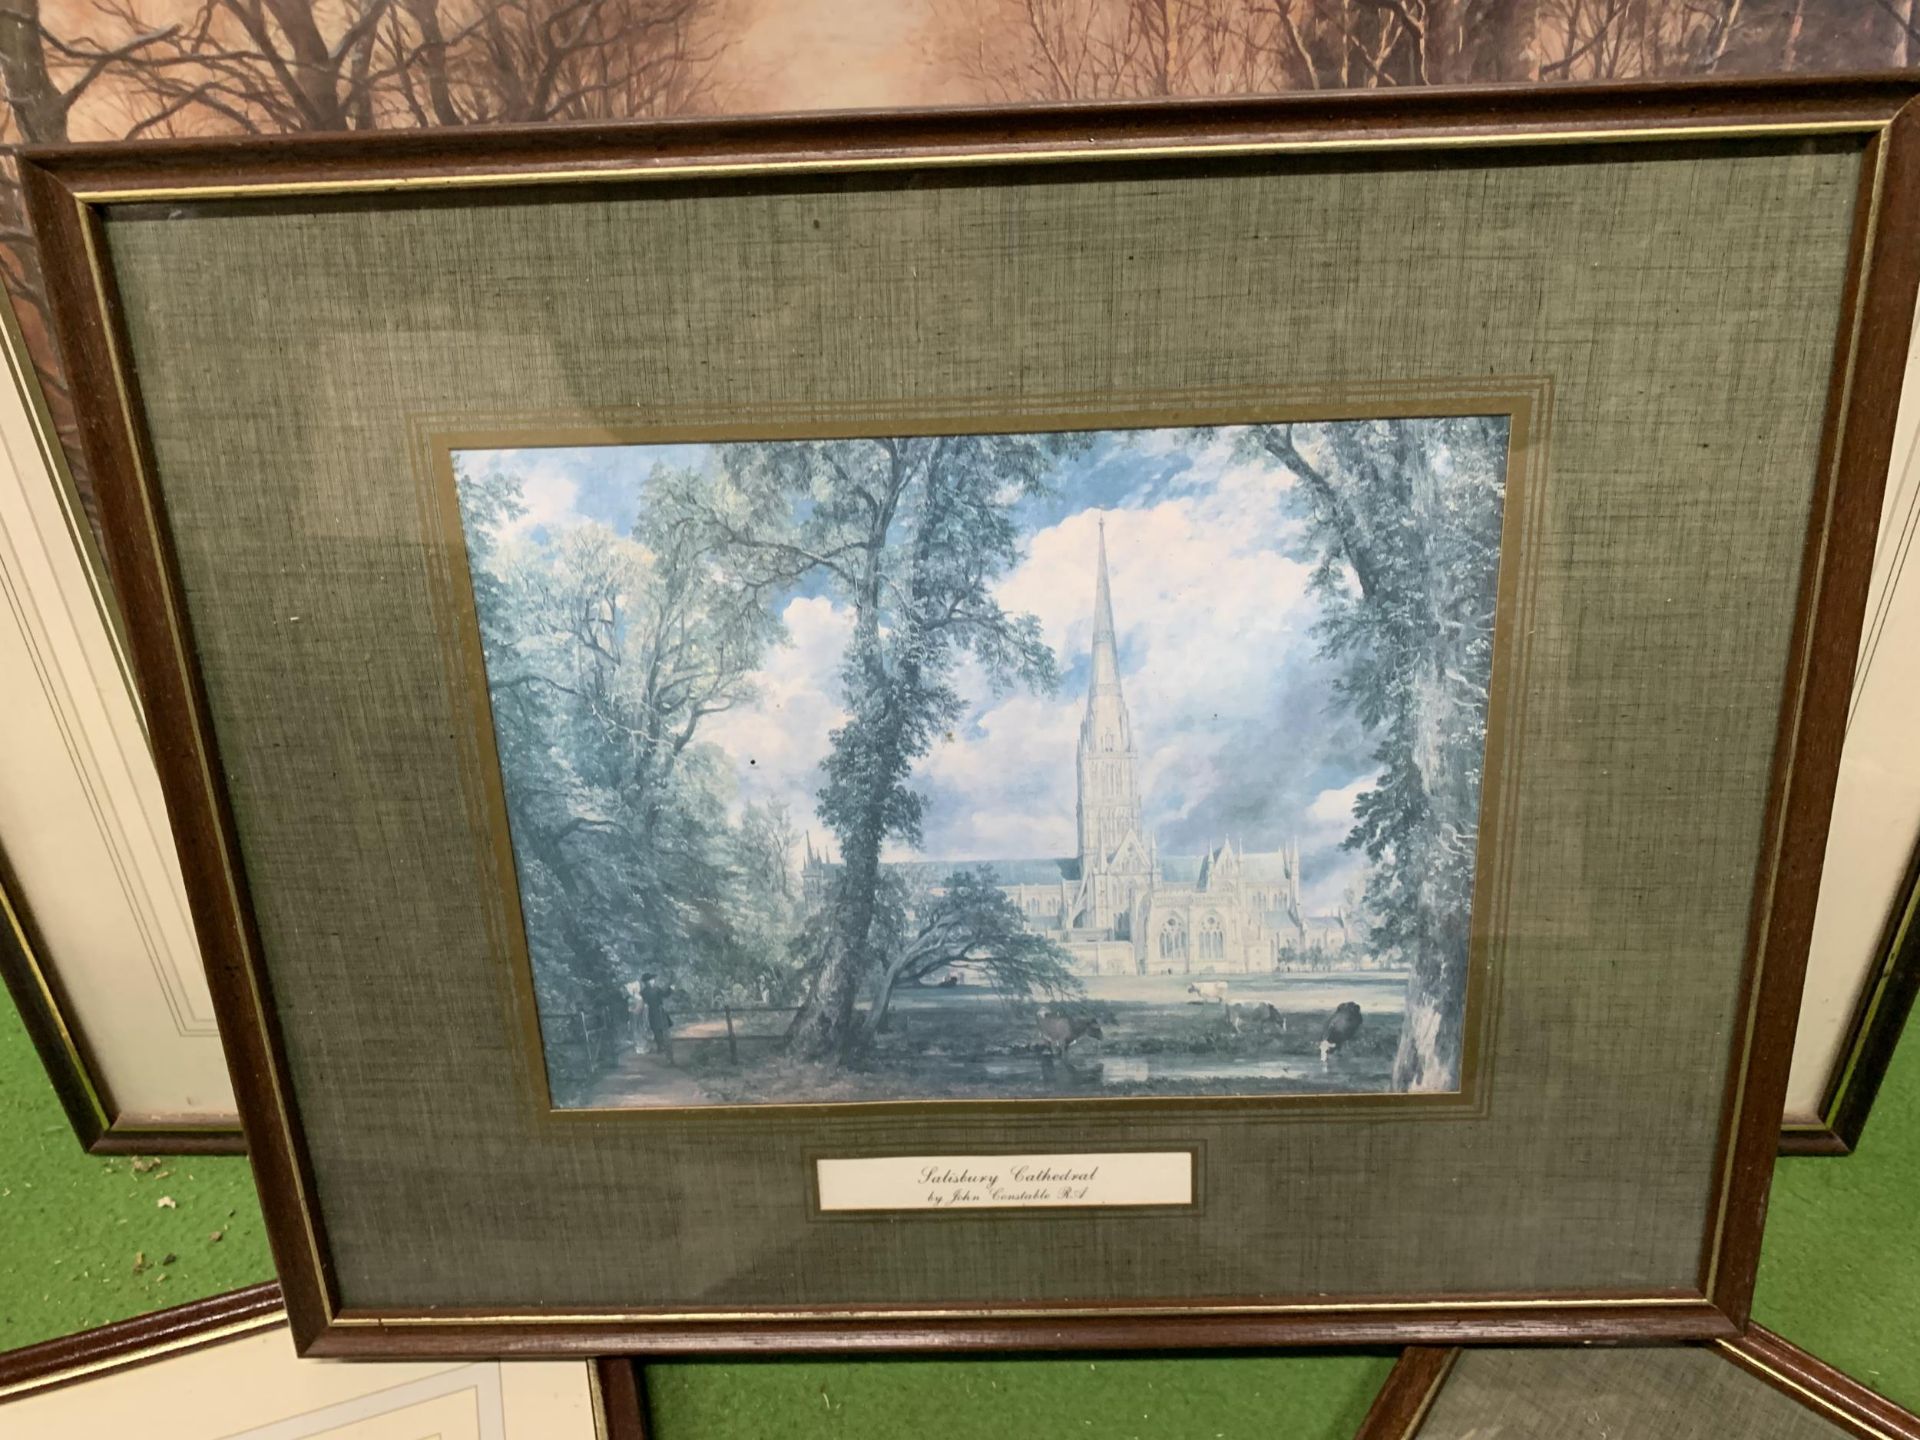 FOUR FRAMED PRINTS, TWO BY JOHN CONSTABLE, DANIEL SHERRIN AND JOSEPH FARQUHARSON - Image 5 of 5